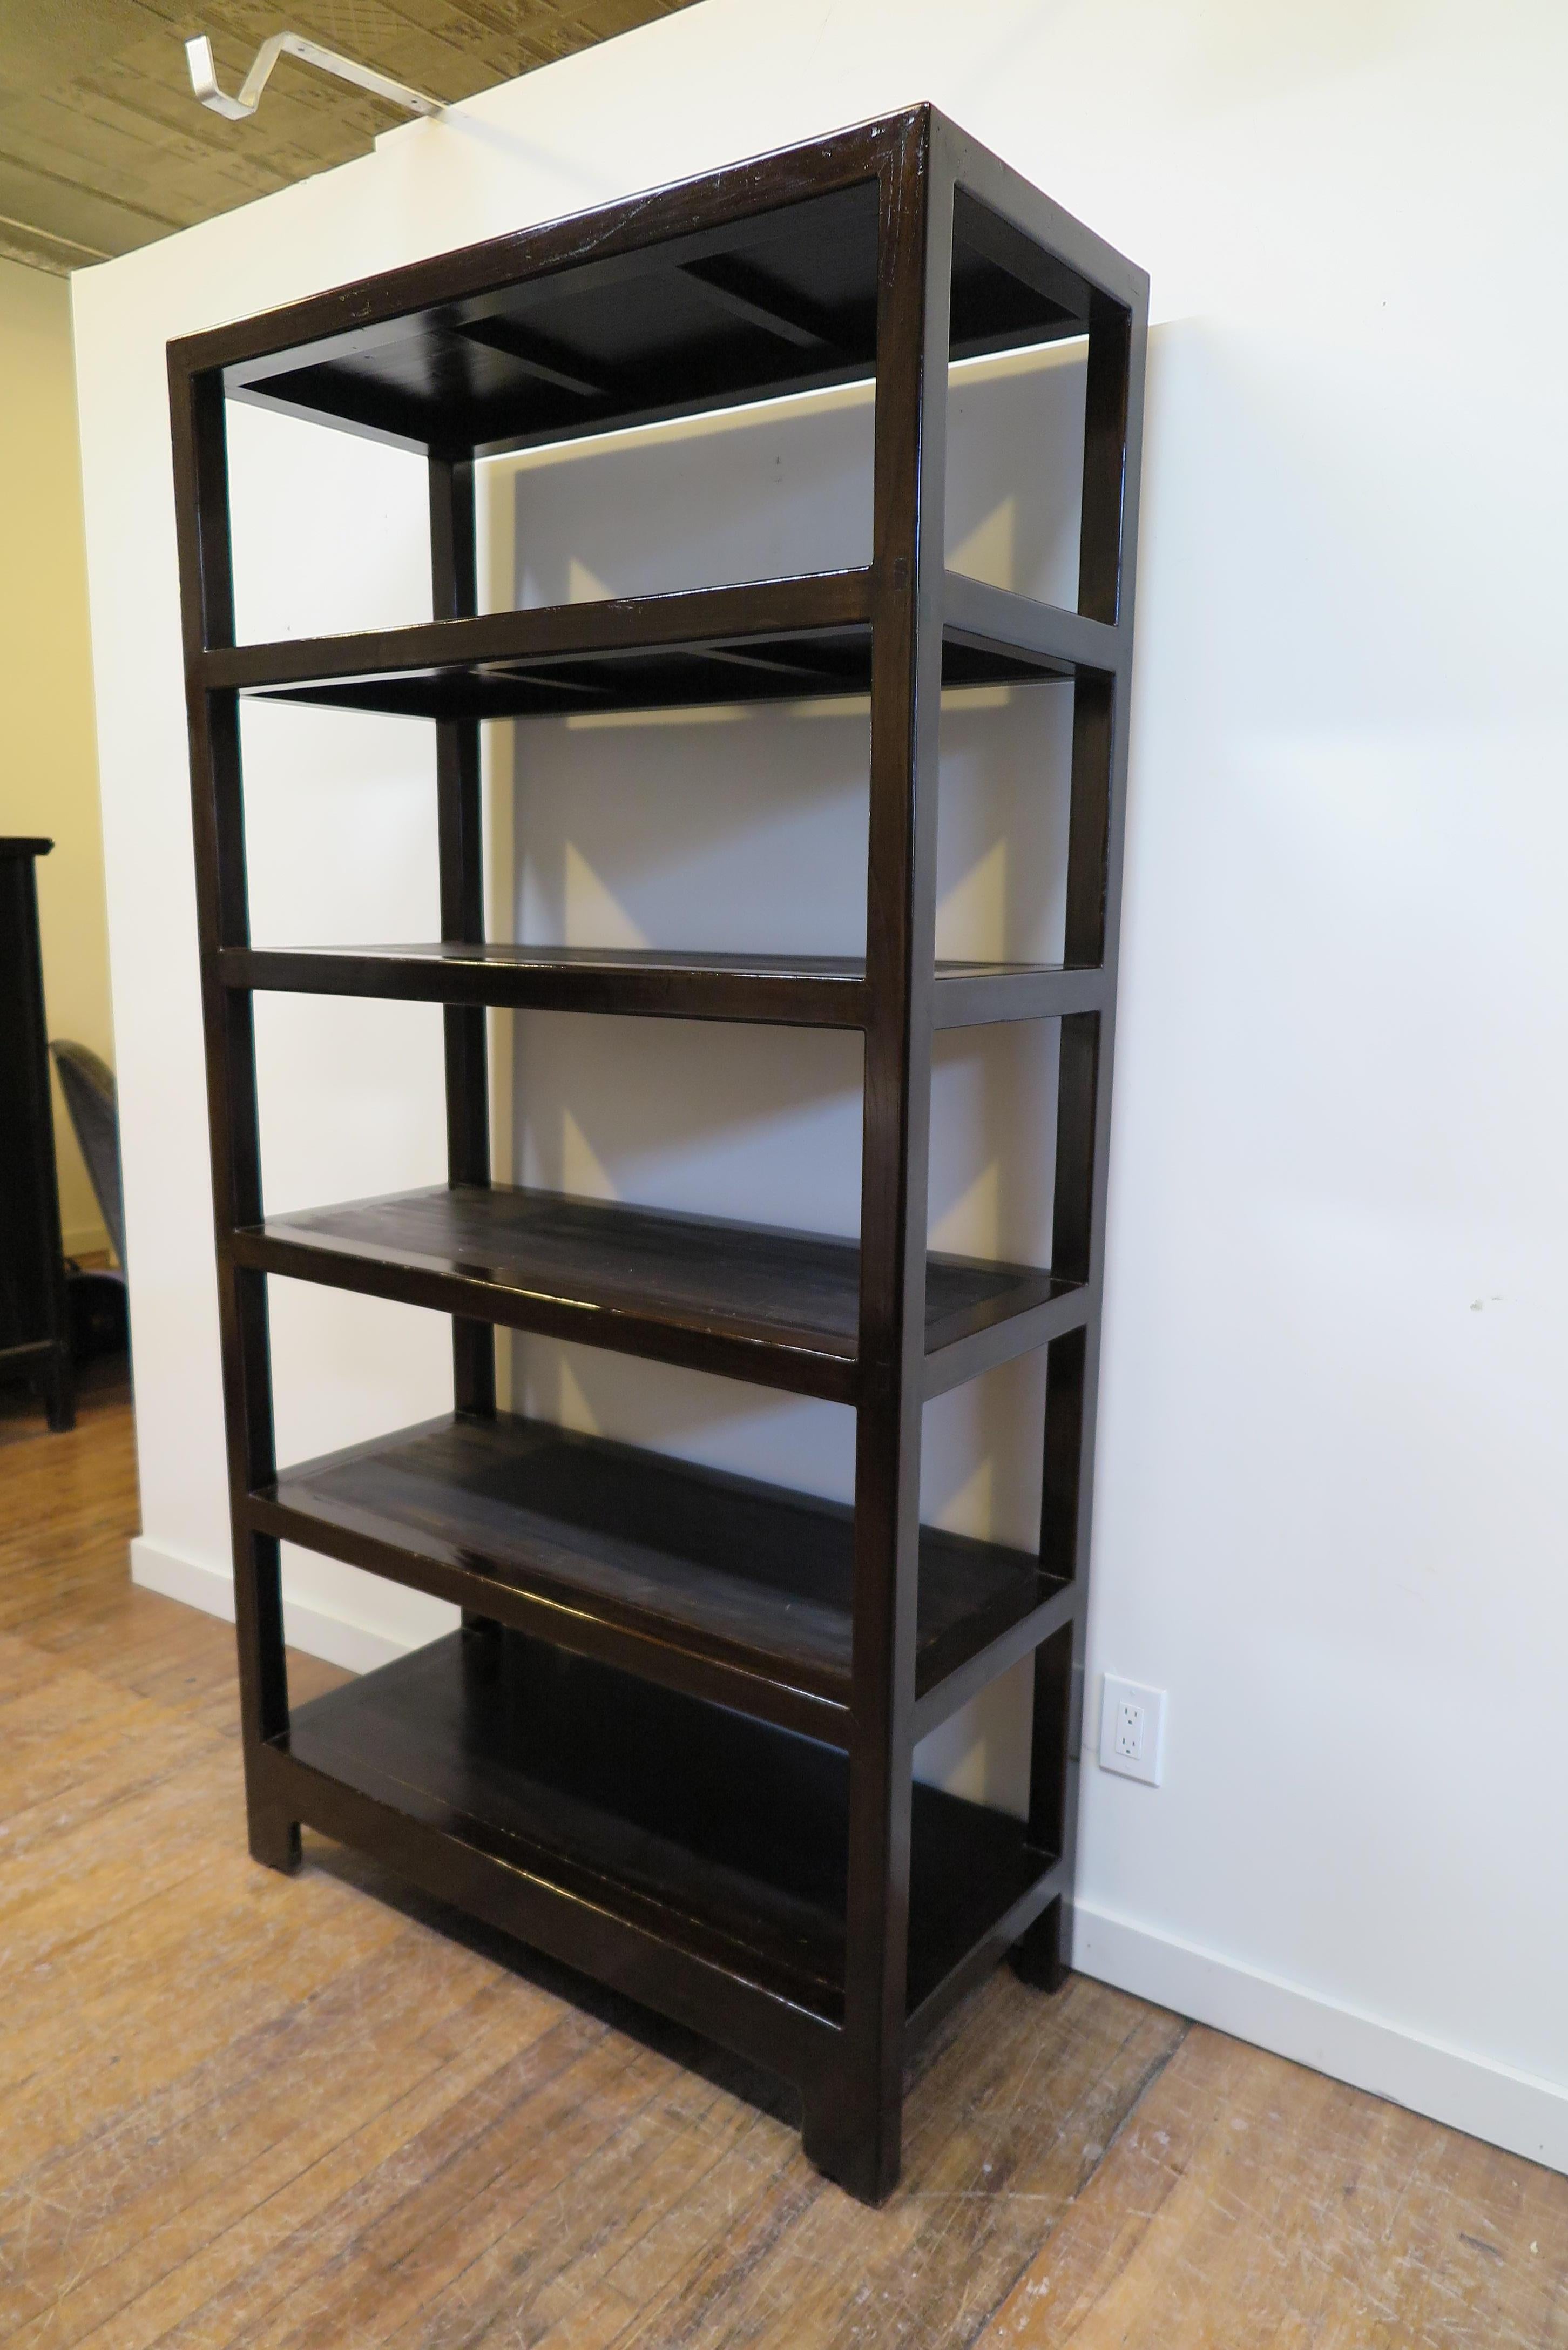 Solid elmwood bookcase, display case, Étagère shelving unit. Late 20th century solid Elm wood, five shelf's all are 12.5 inches high.
Very strong solid wood. Dark brown walnut color. Shelf's are darker. Very good condition.

                    